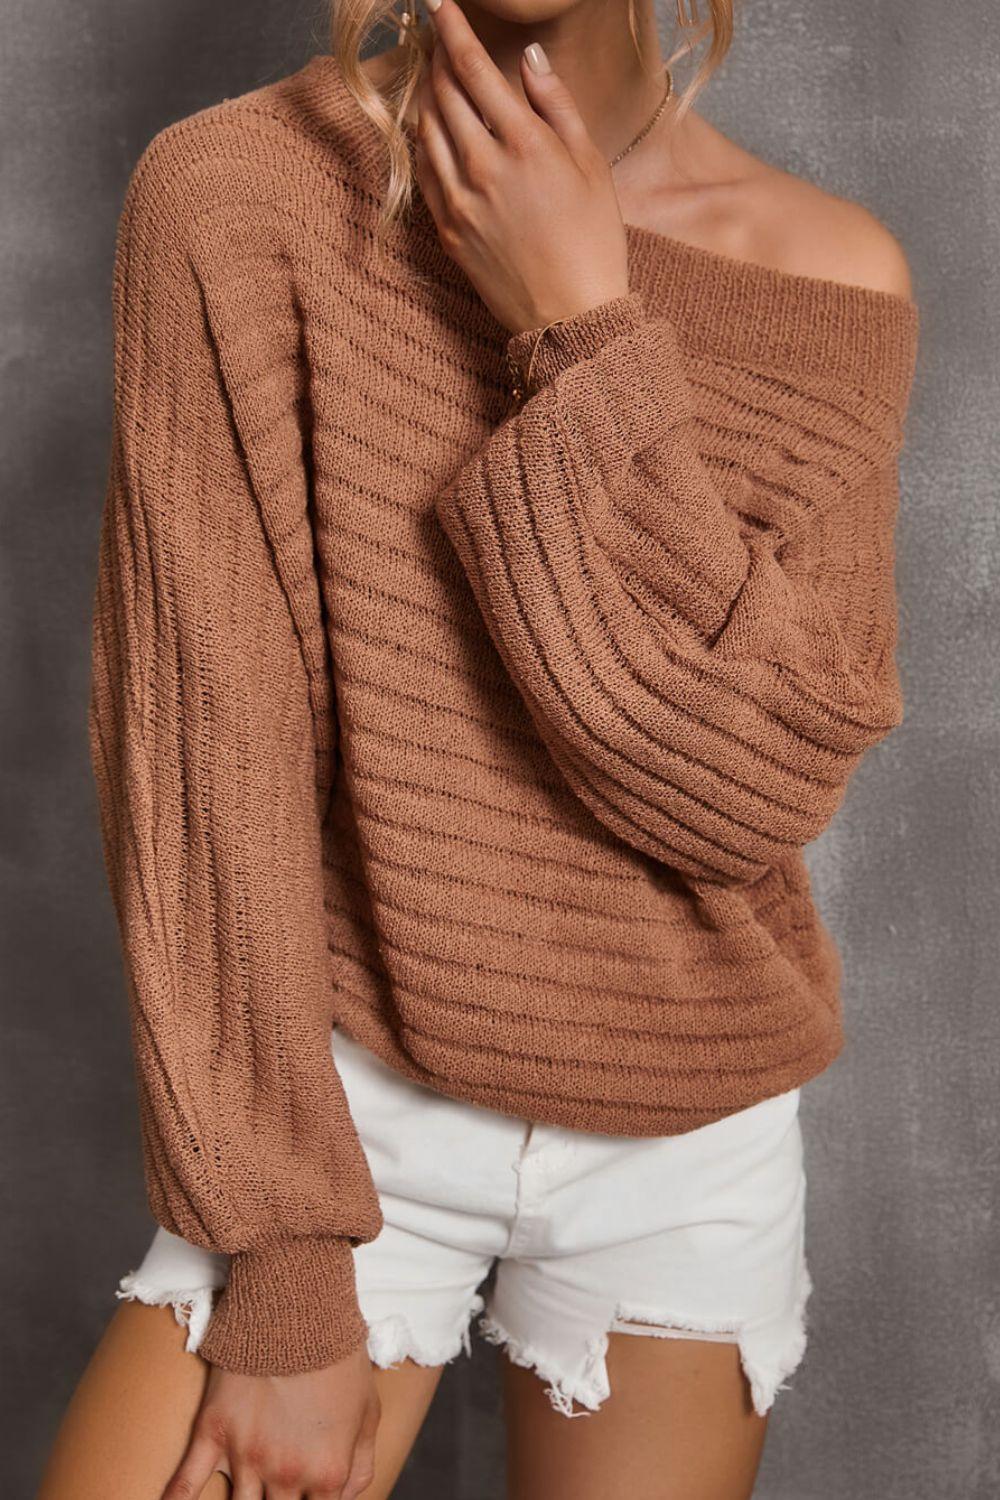 Drop Shoulder Sweater Horizontal Ribbing -Womens brown ribbed off shoulder sweater#Firefly Lane Boutique1